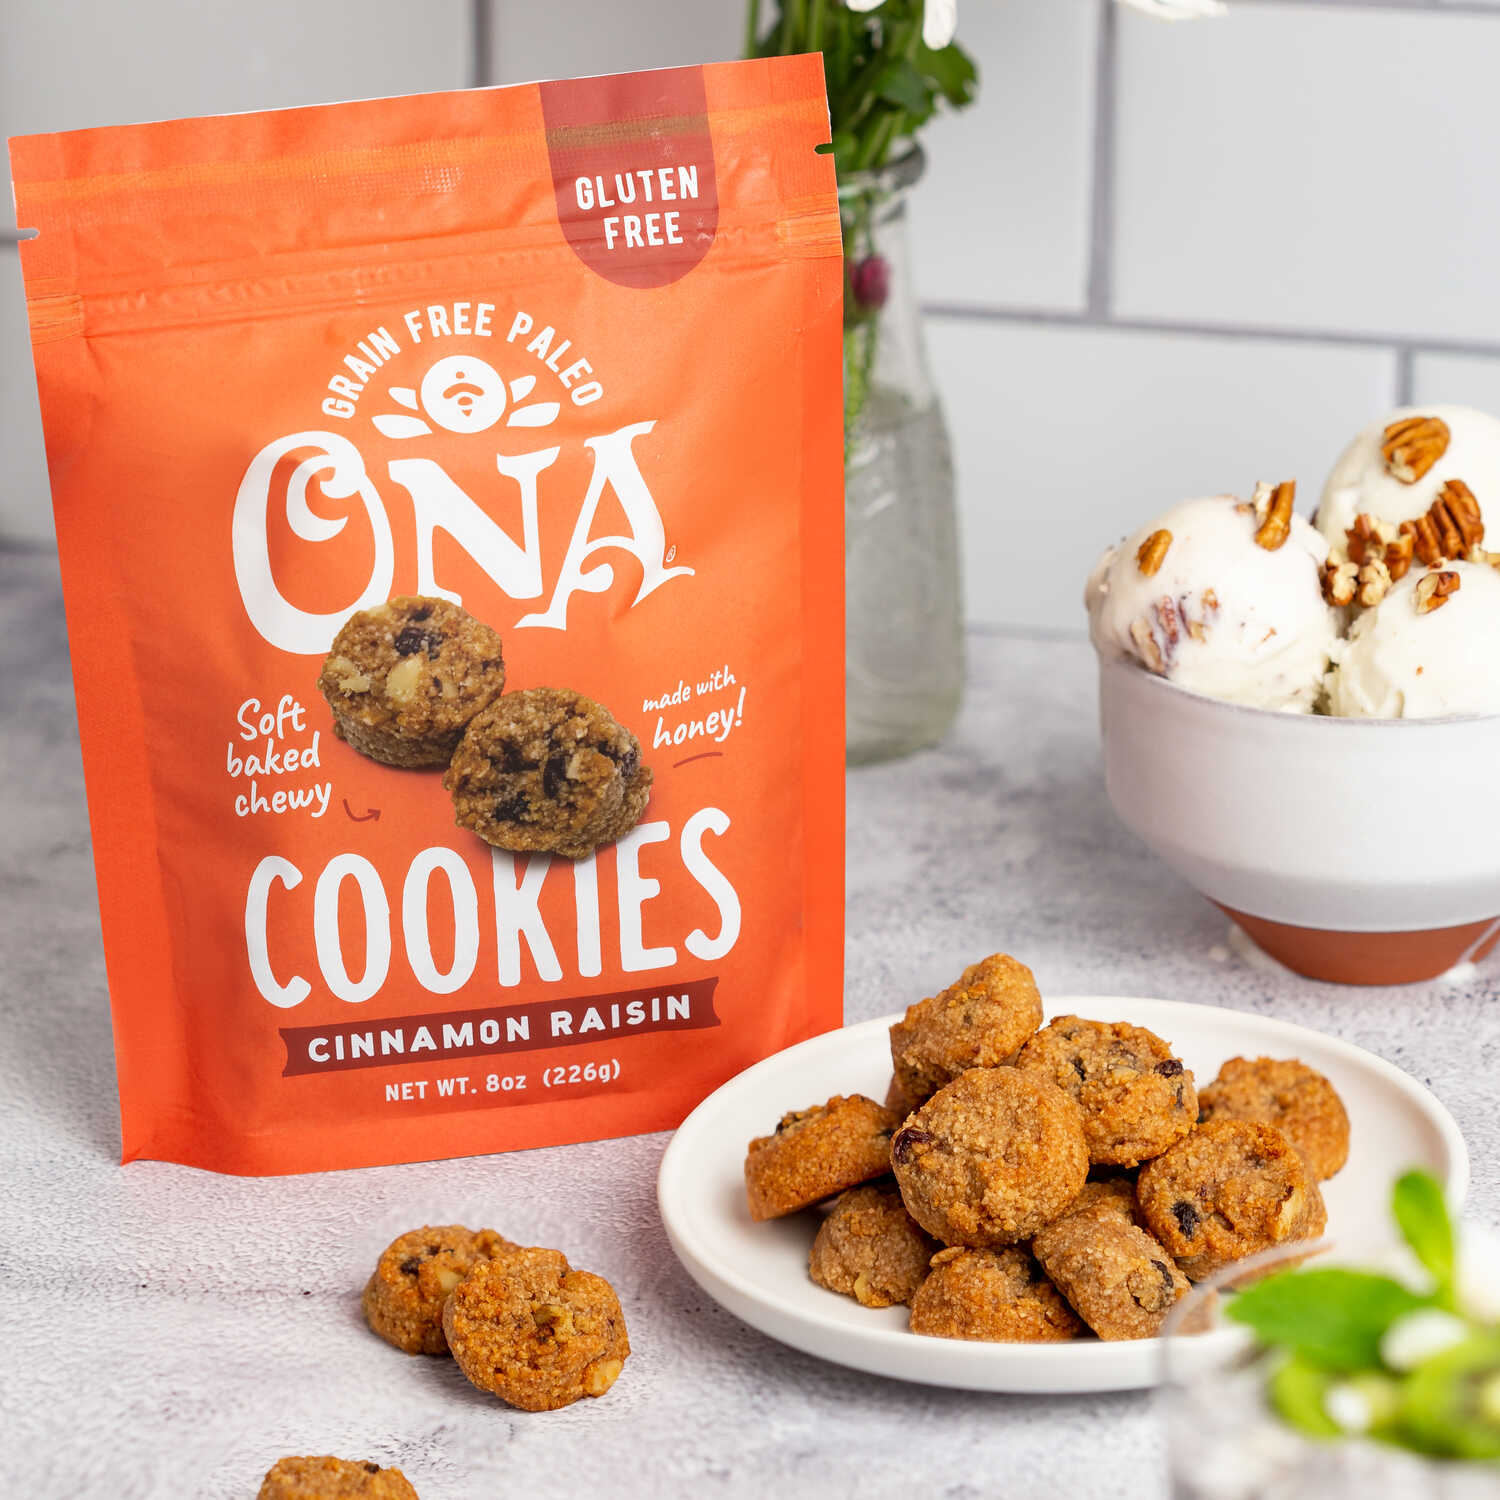 Ona Cinnamon Raisin Cookies in pouch and on plate with ice cream